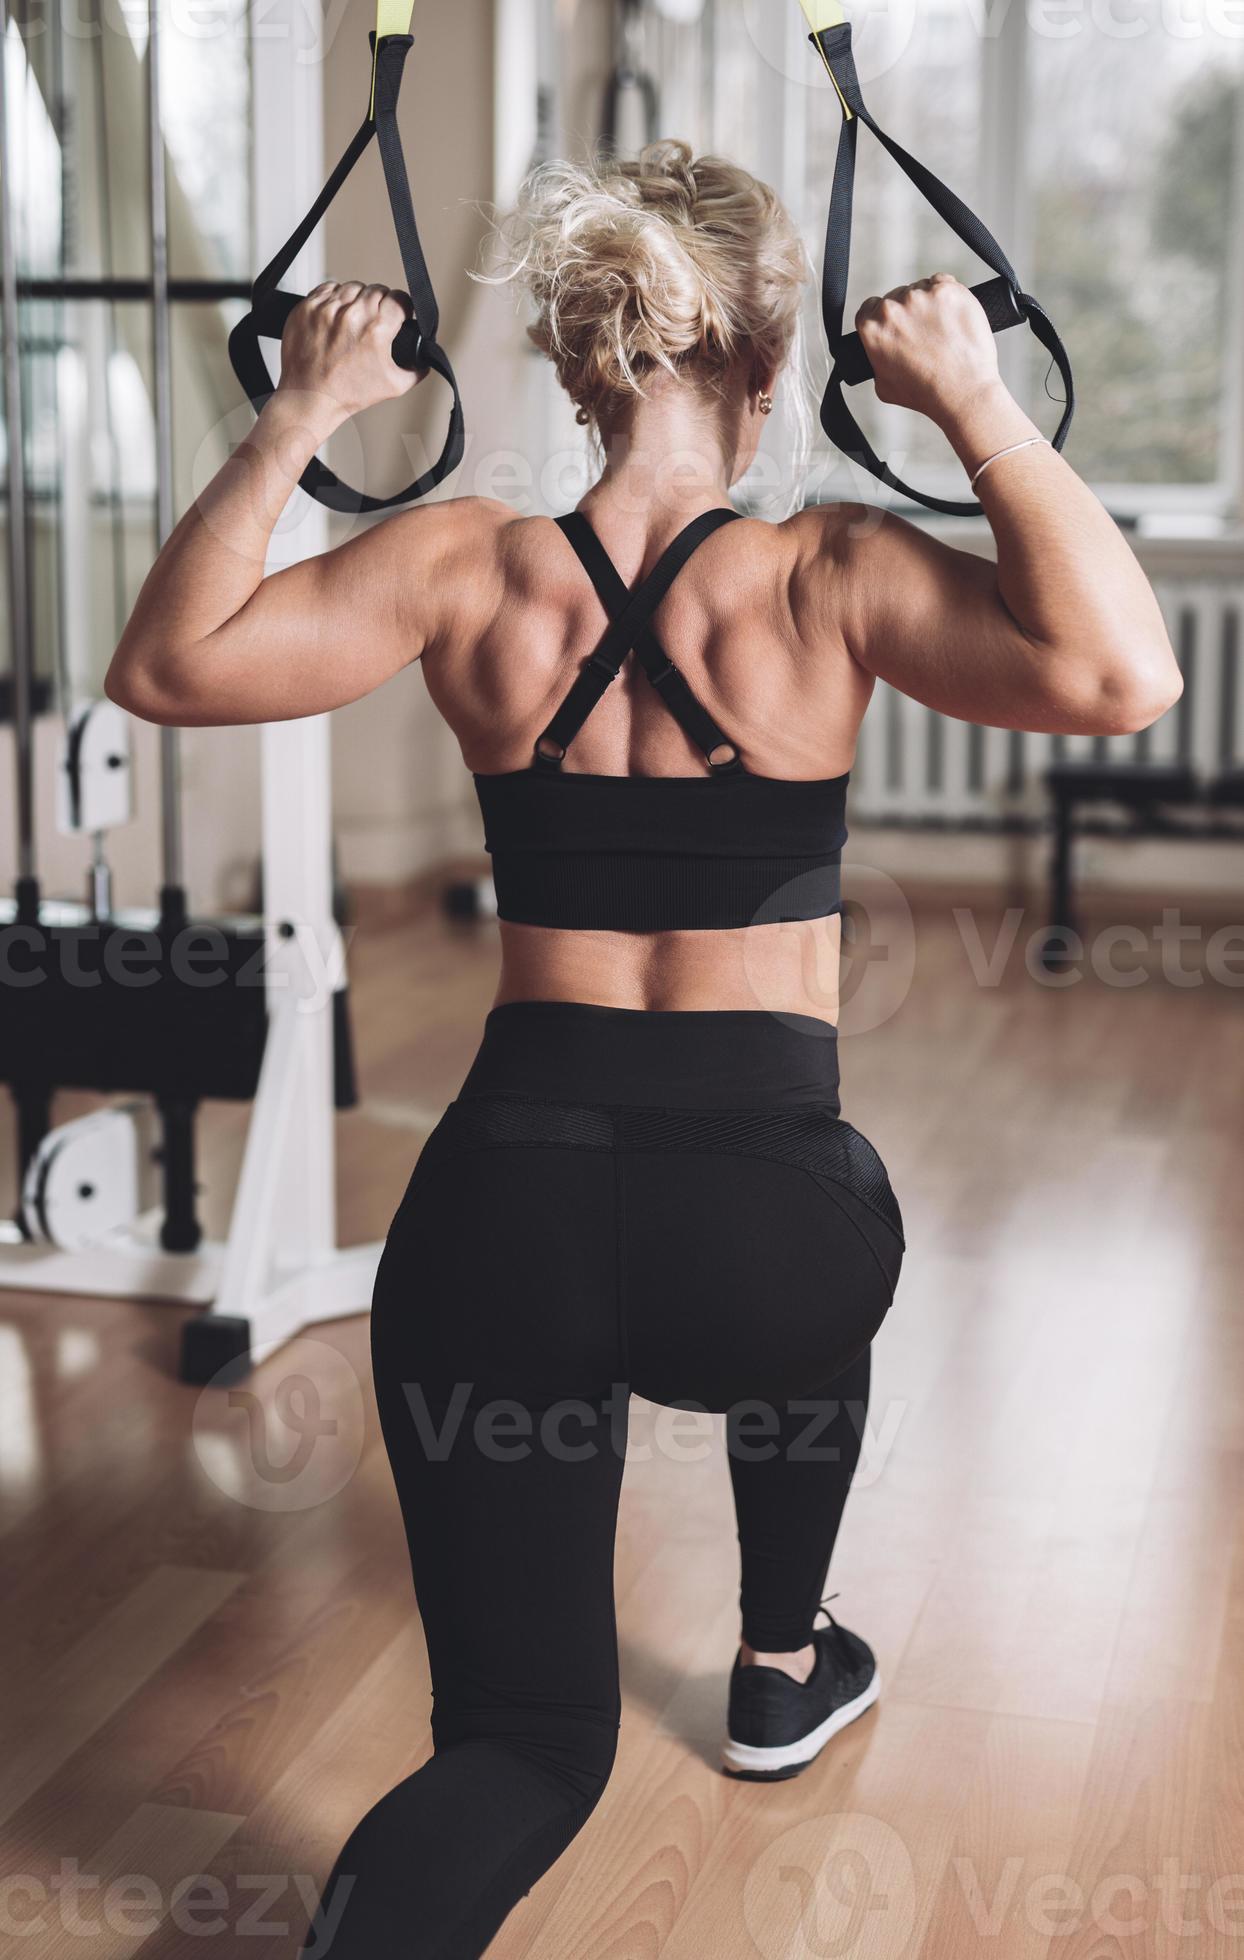 https://static.vecteezy.com/system/resources/previews/017/624/378/large_2x/strong-girl-in-the-gym-pumping-her-arms-and-back-muscles-on-the-exercise-machine-photo.jpg